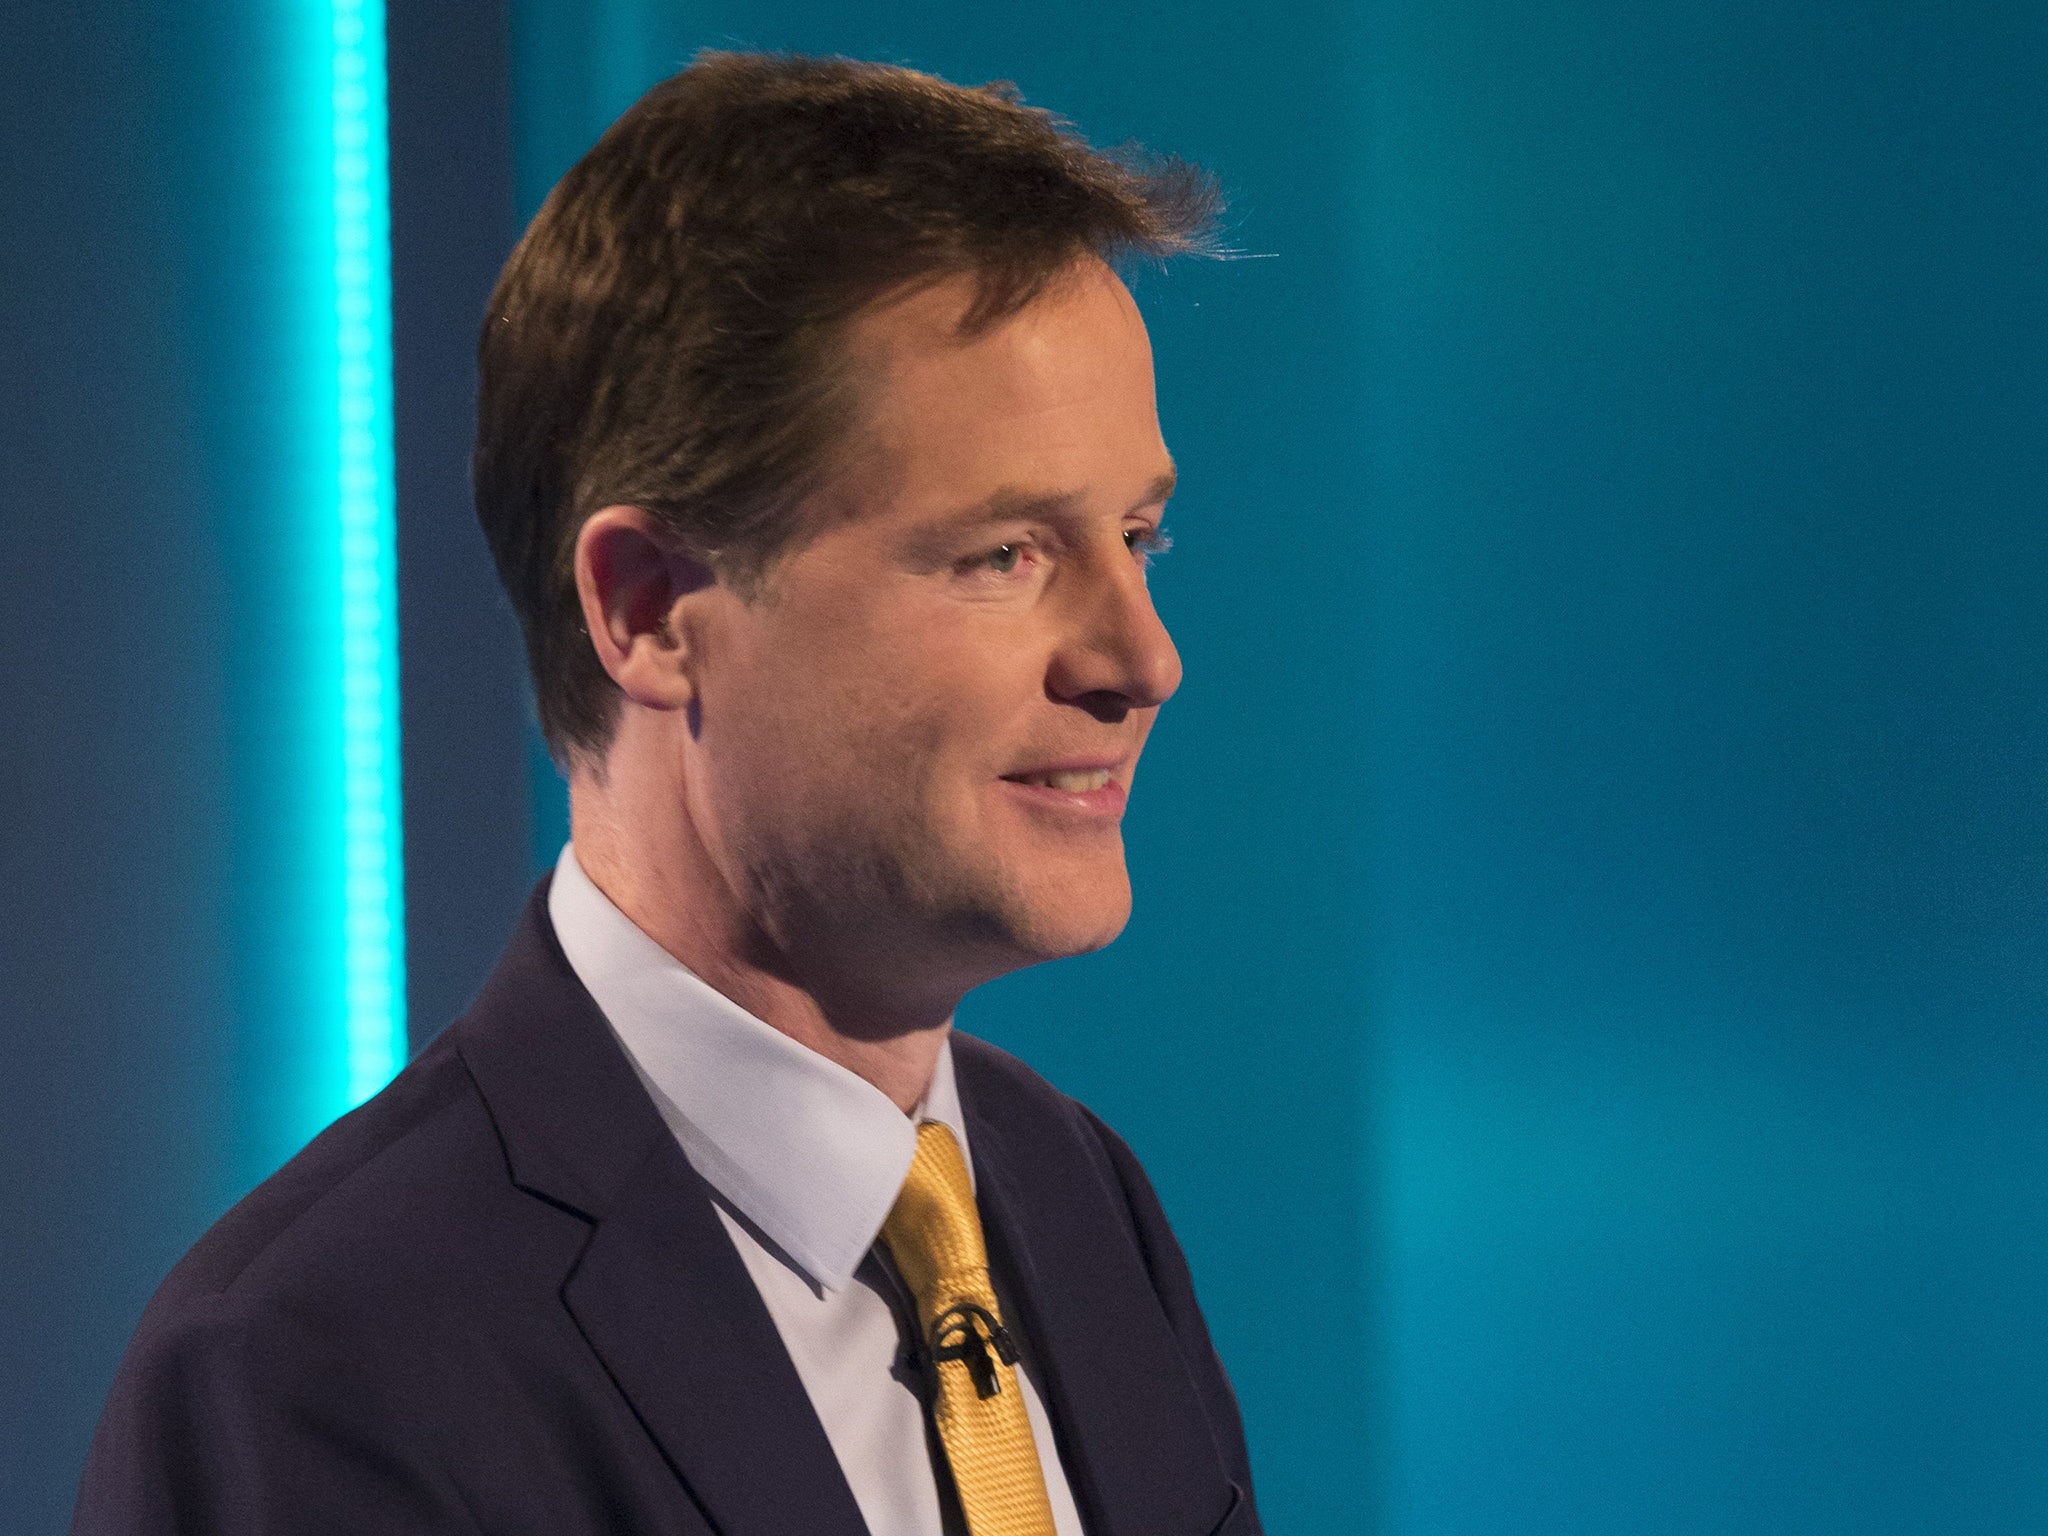 Nick Clegg says there's "good immigration and bad immigration". "I want Britain to be open for business but not open to abuse".